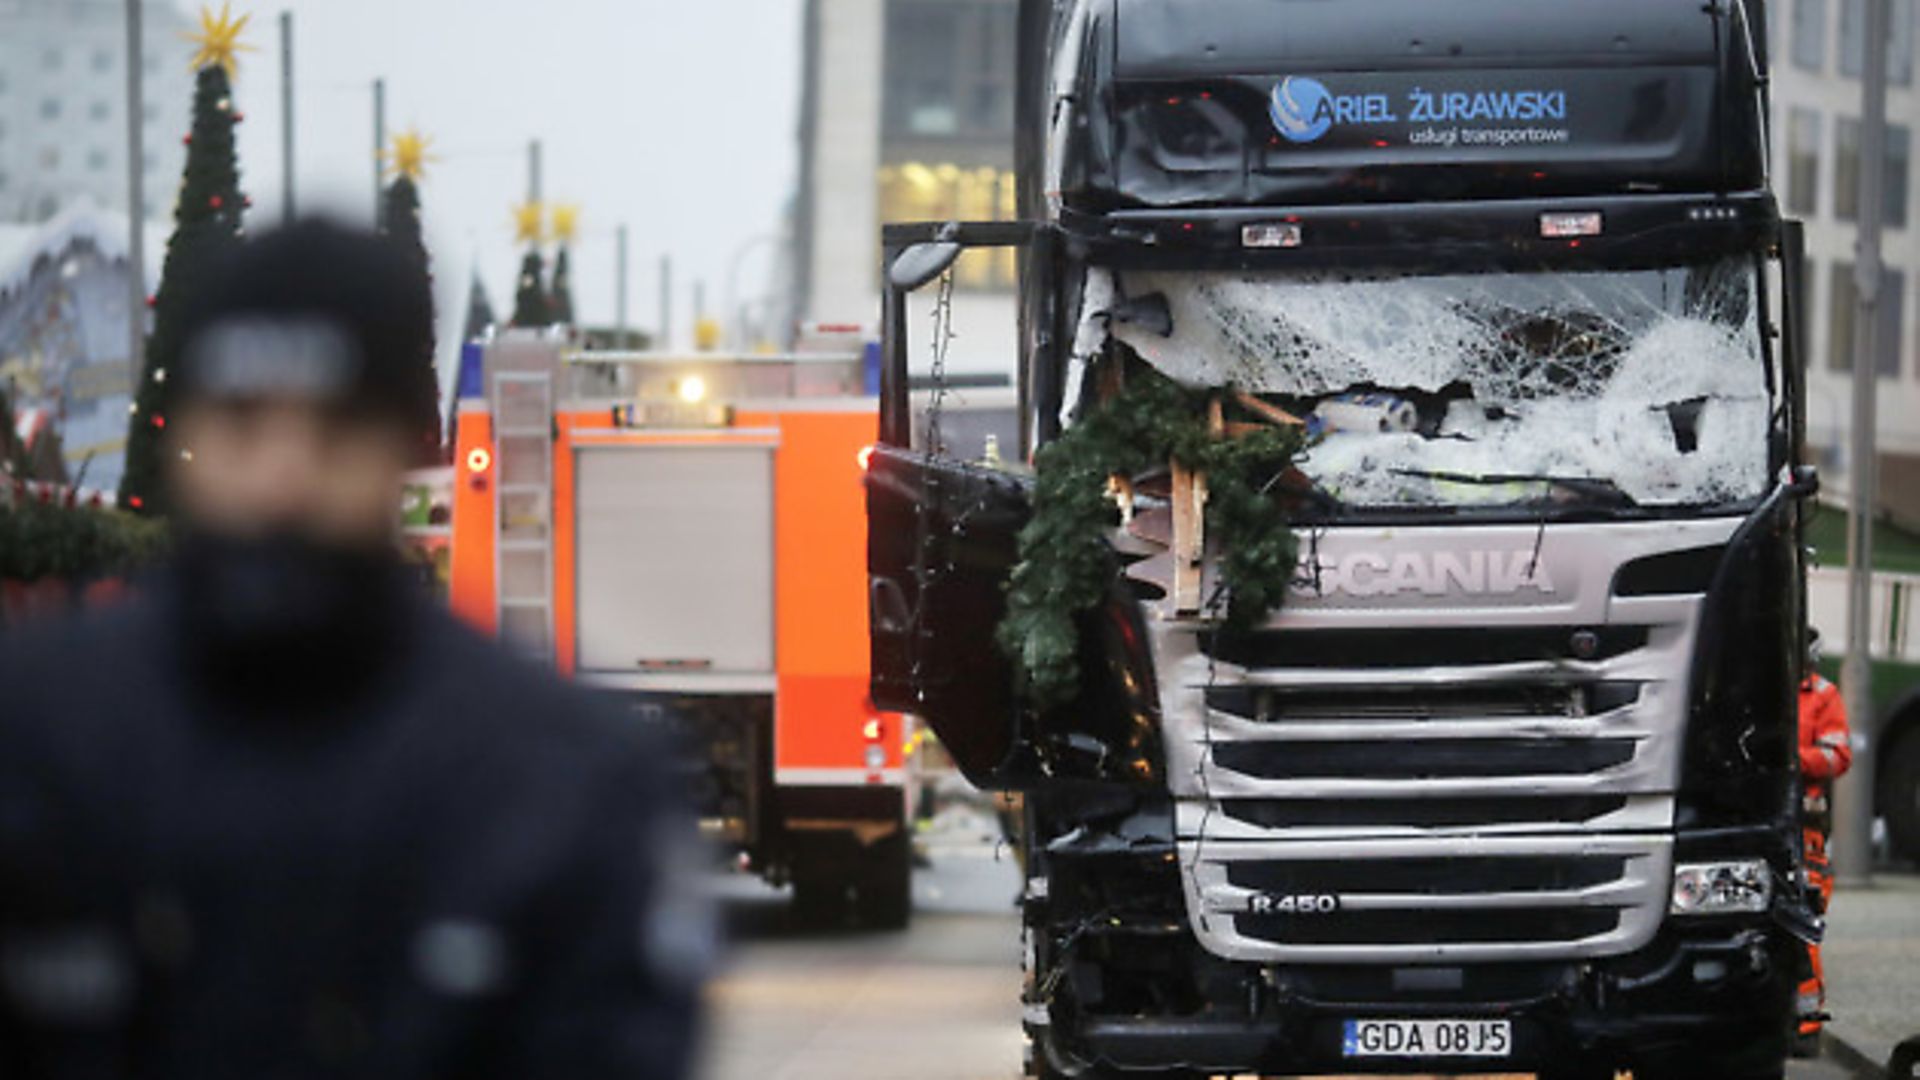 A truck which ran into a crowded Christmas market Monday evening killing several people Monday evening is seen in Berlin, Germany, Tuesday, Dec. 20, 2016.(AP Photo/Markus Schreiber) - Credit: AP/Press Association Images